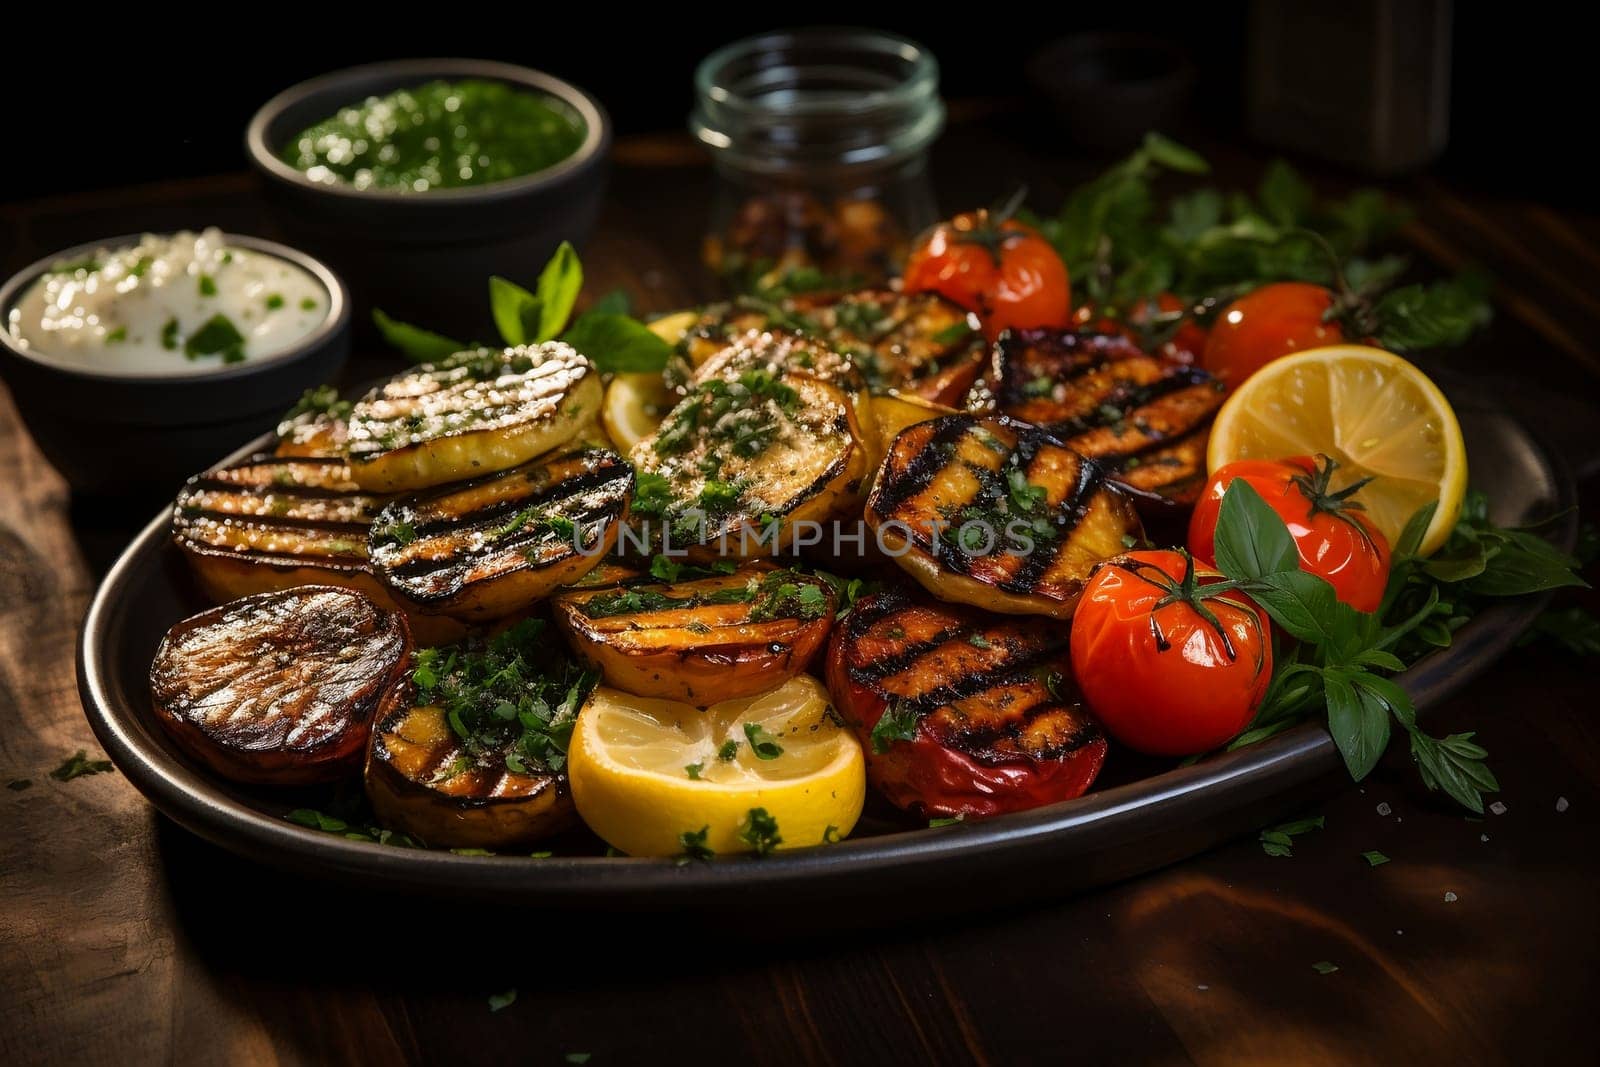 Meat cutlets and grilled vegetables on a dish on the kitchen table, greens and cutlery nearby. AI by maclura